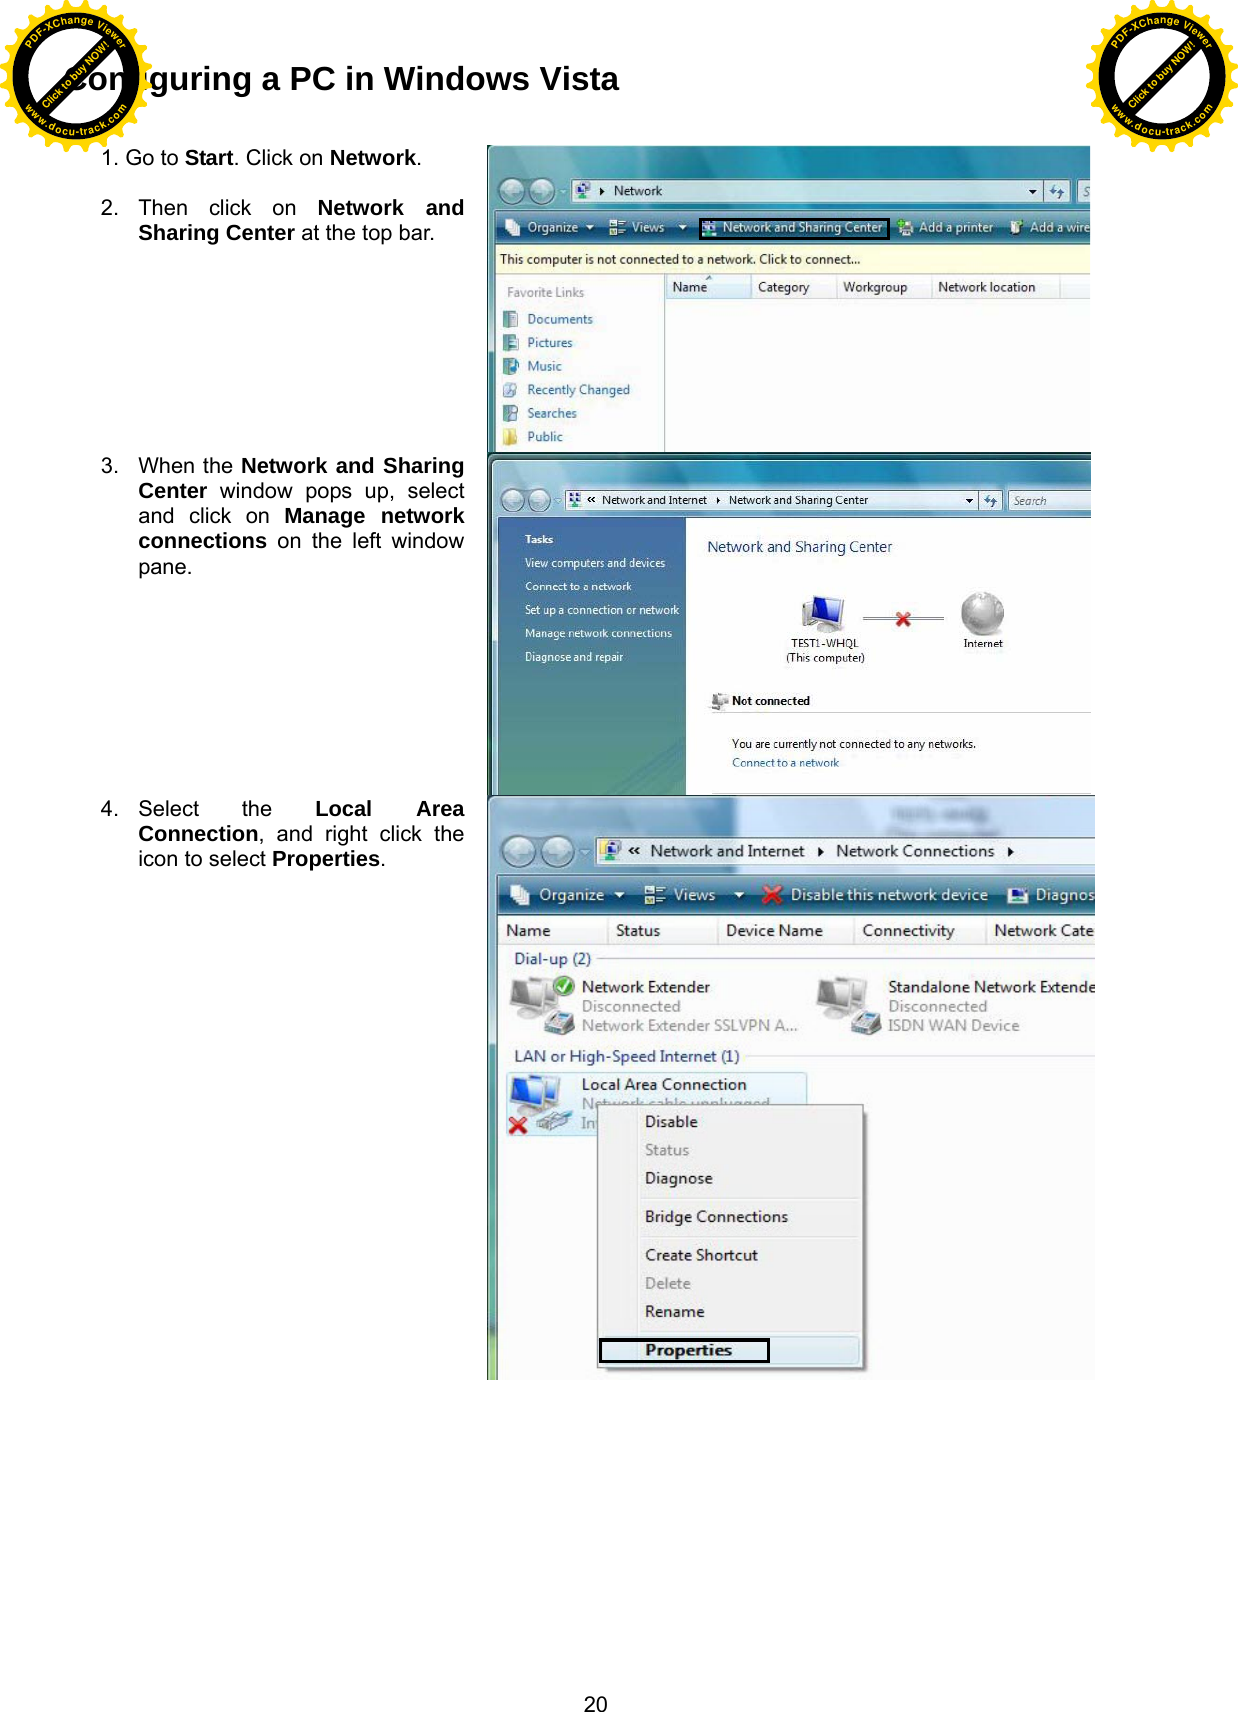  20 Configuring a PC in Windows Vista  1. Go to Start. Click on Network.  2. Then click on Network and Sharing Center at the top bar. 3. When the Network and Sharing Center window pops up, select and click on Manage network connections on the left window pane. 4. Select  the  Local Area Connection, and right click the icon to select Properties. Click to buy NOW!PDF-XChange Viewerwww.docu-track.comClick to buy NOW!PDF-XChange Viewerwww.docu-track.com